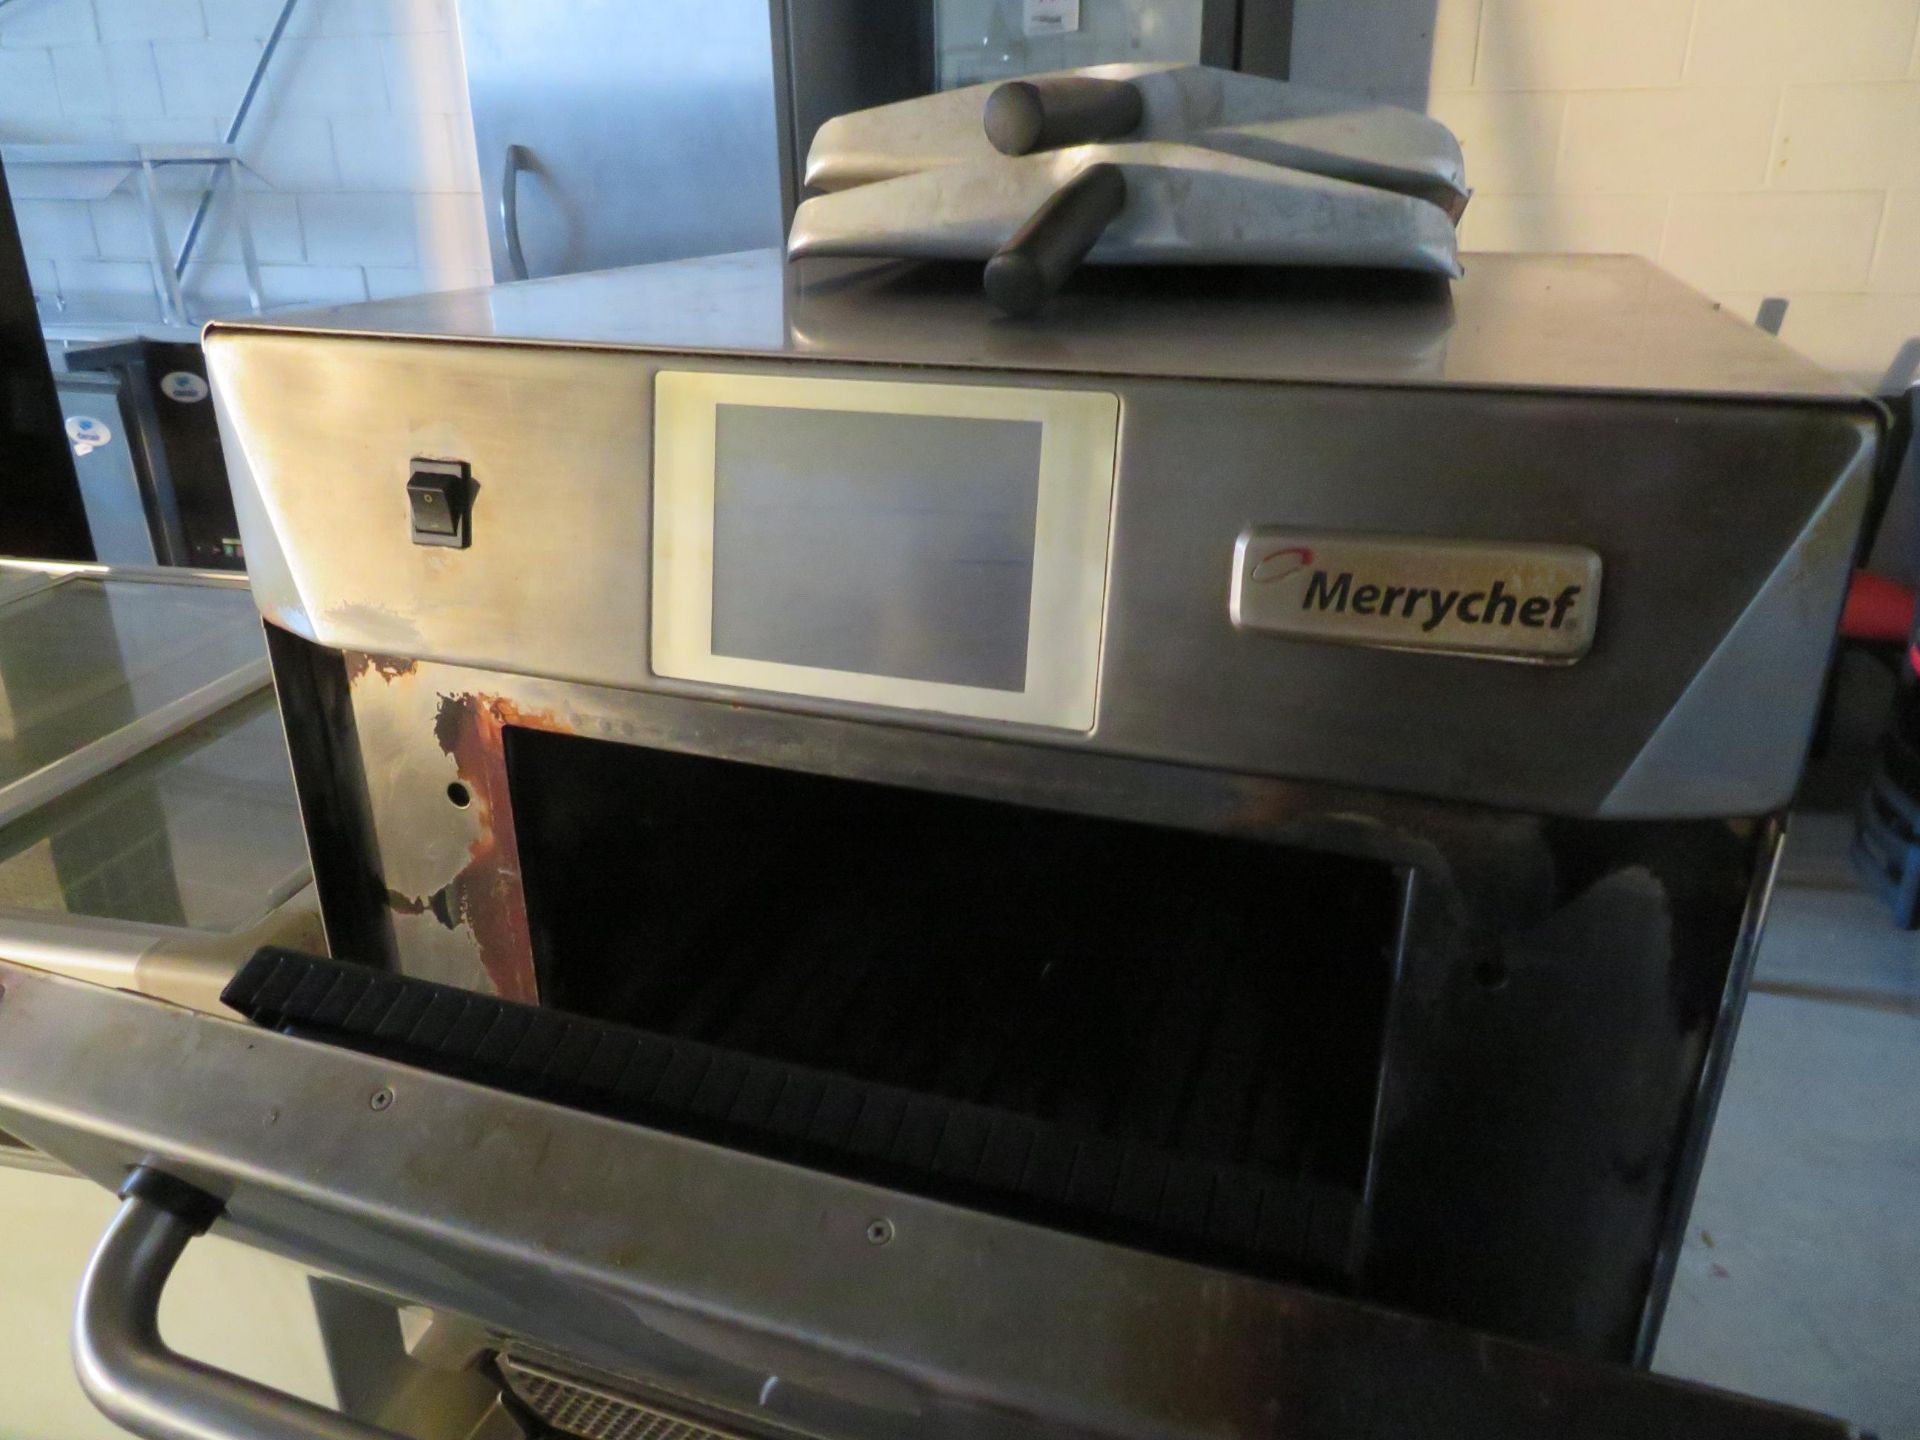 MERRYCHEF oven, Mod # EIKON E4S, approx. 23"w x 23"d x 23"h - Image 2 of 2